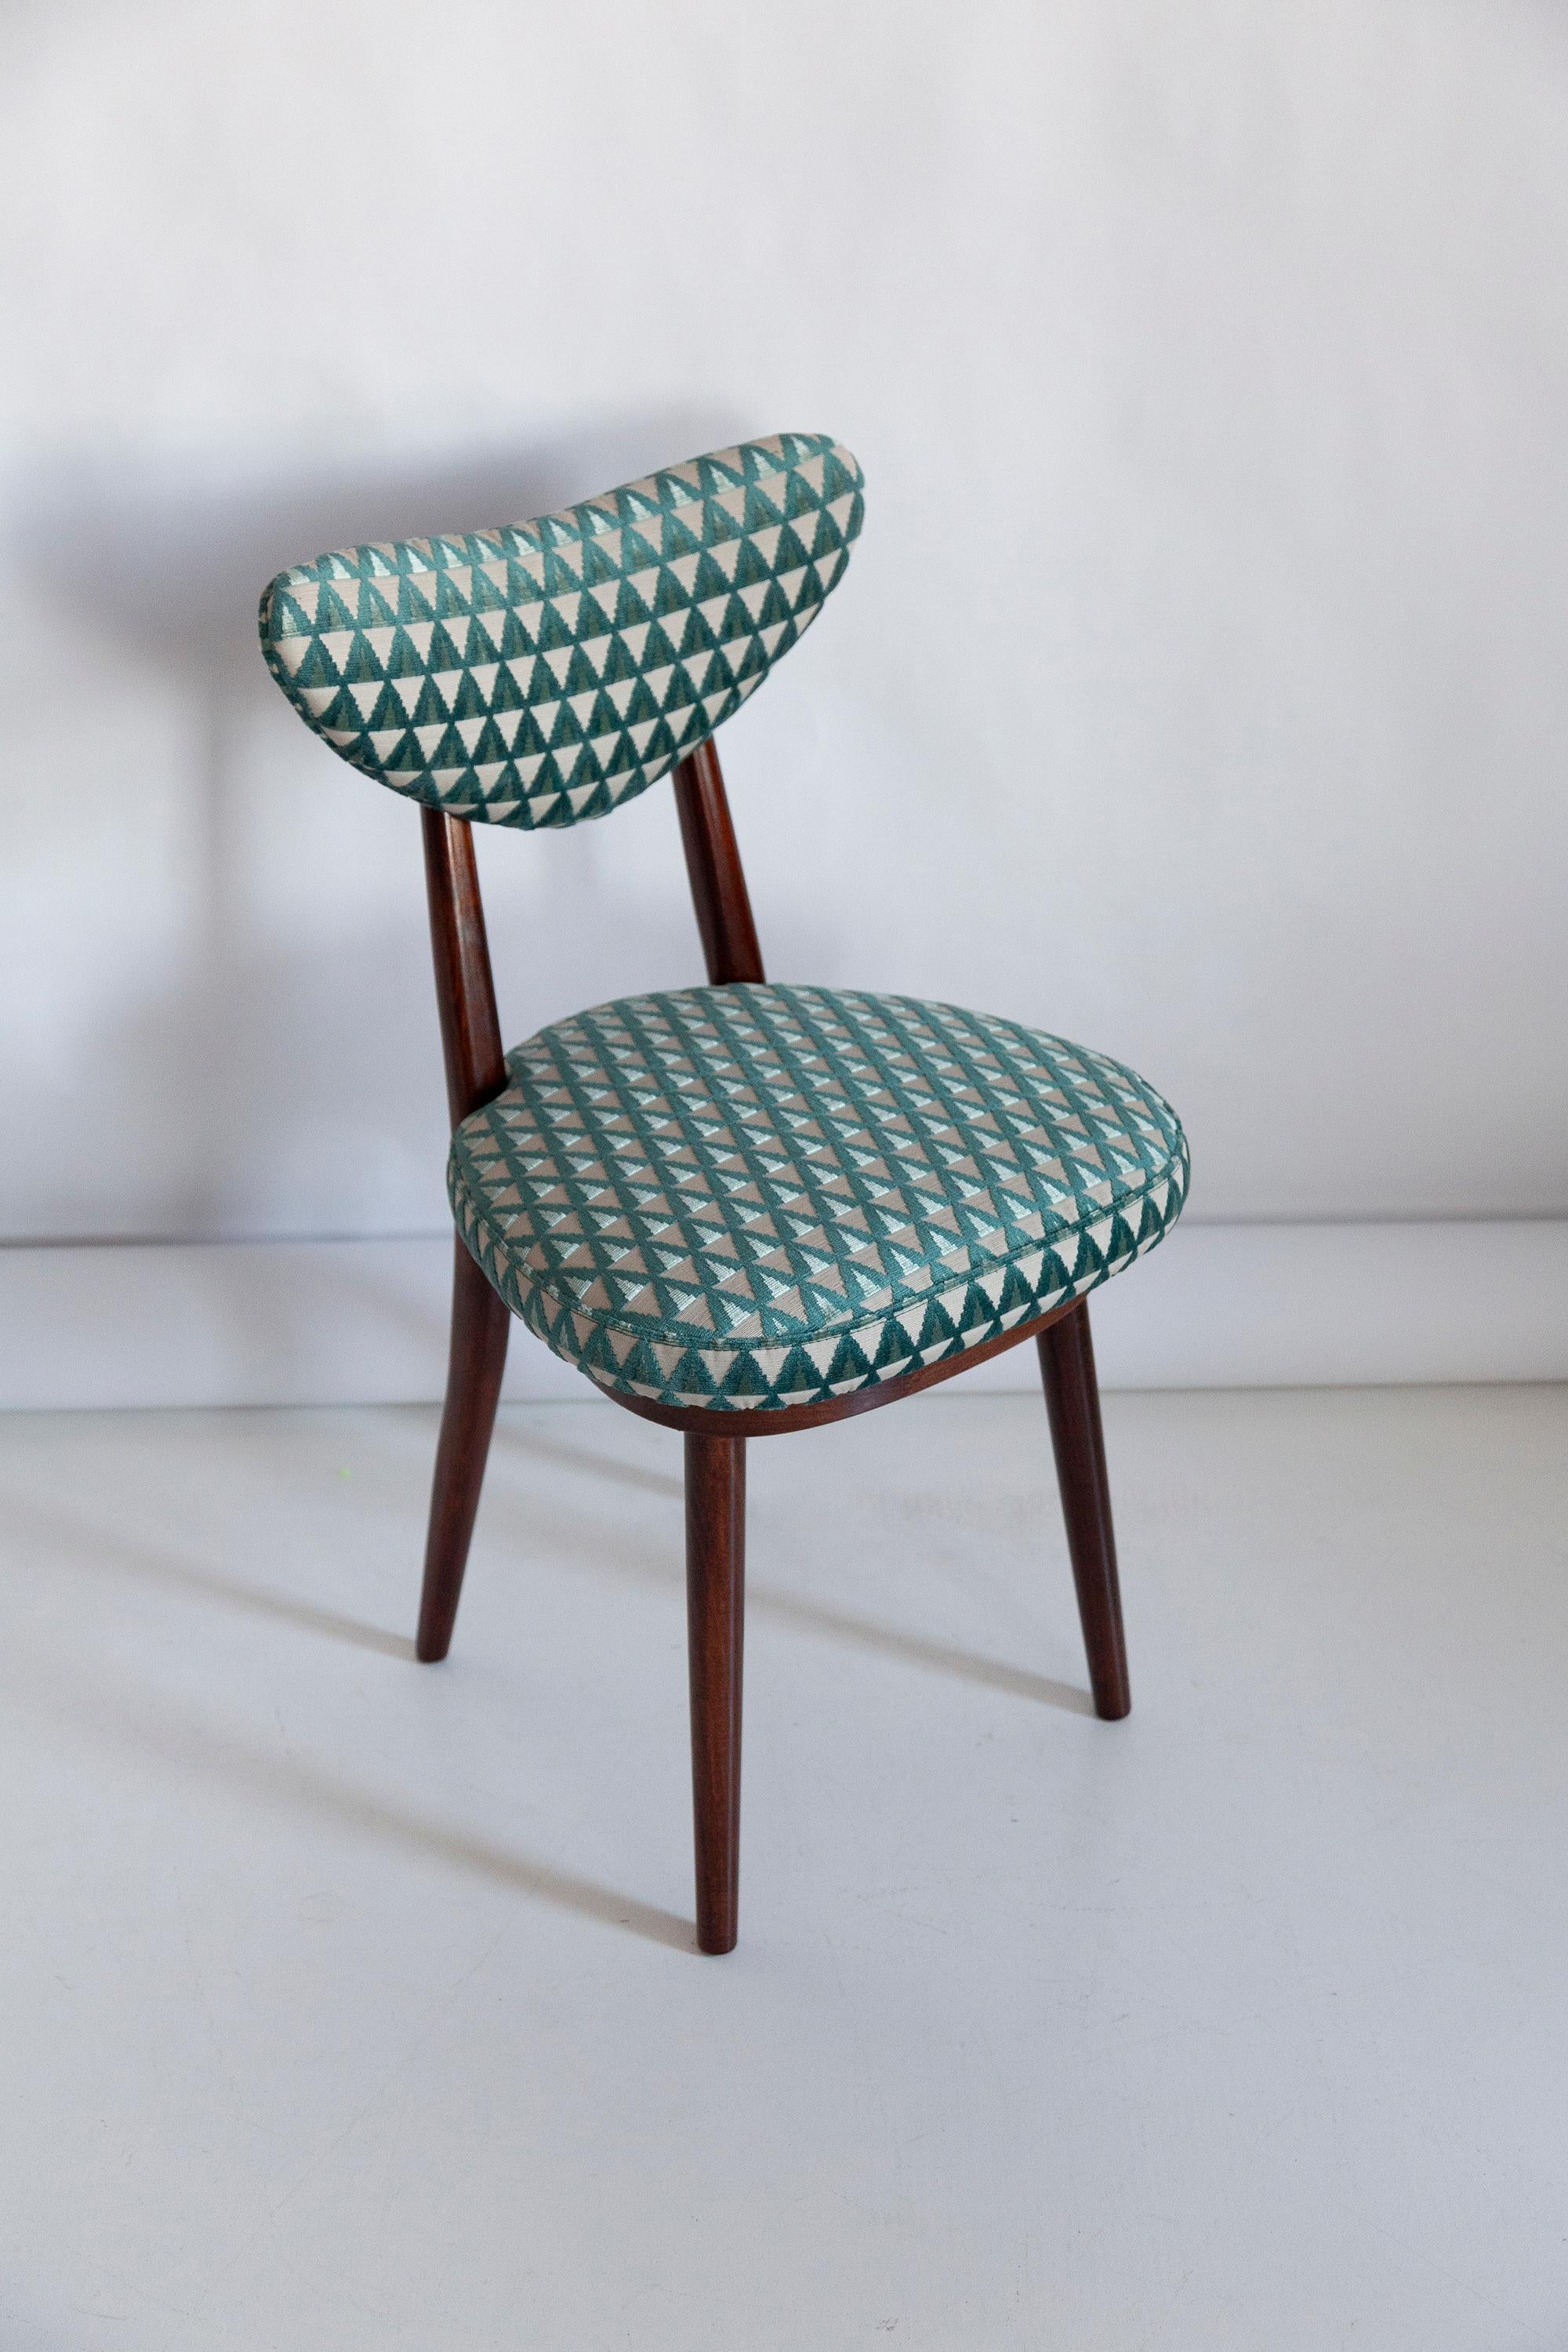 Set of Six Mid-Century Heart Chairs in Amuleto Green Velvet, Europe, 1960s For Sale 1